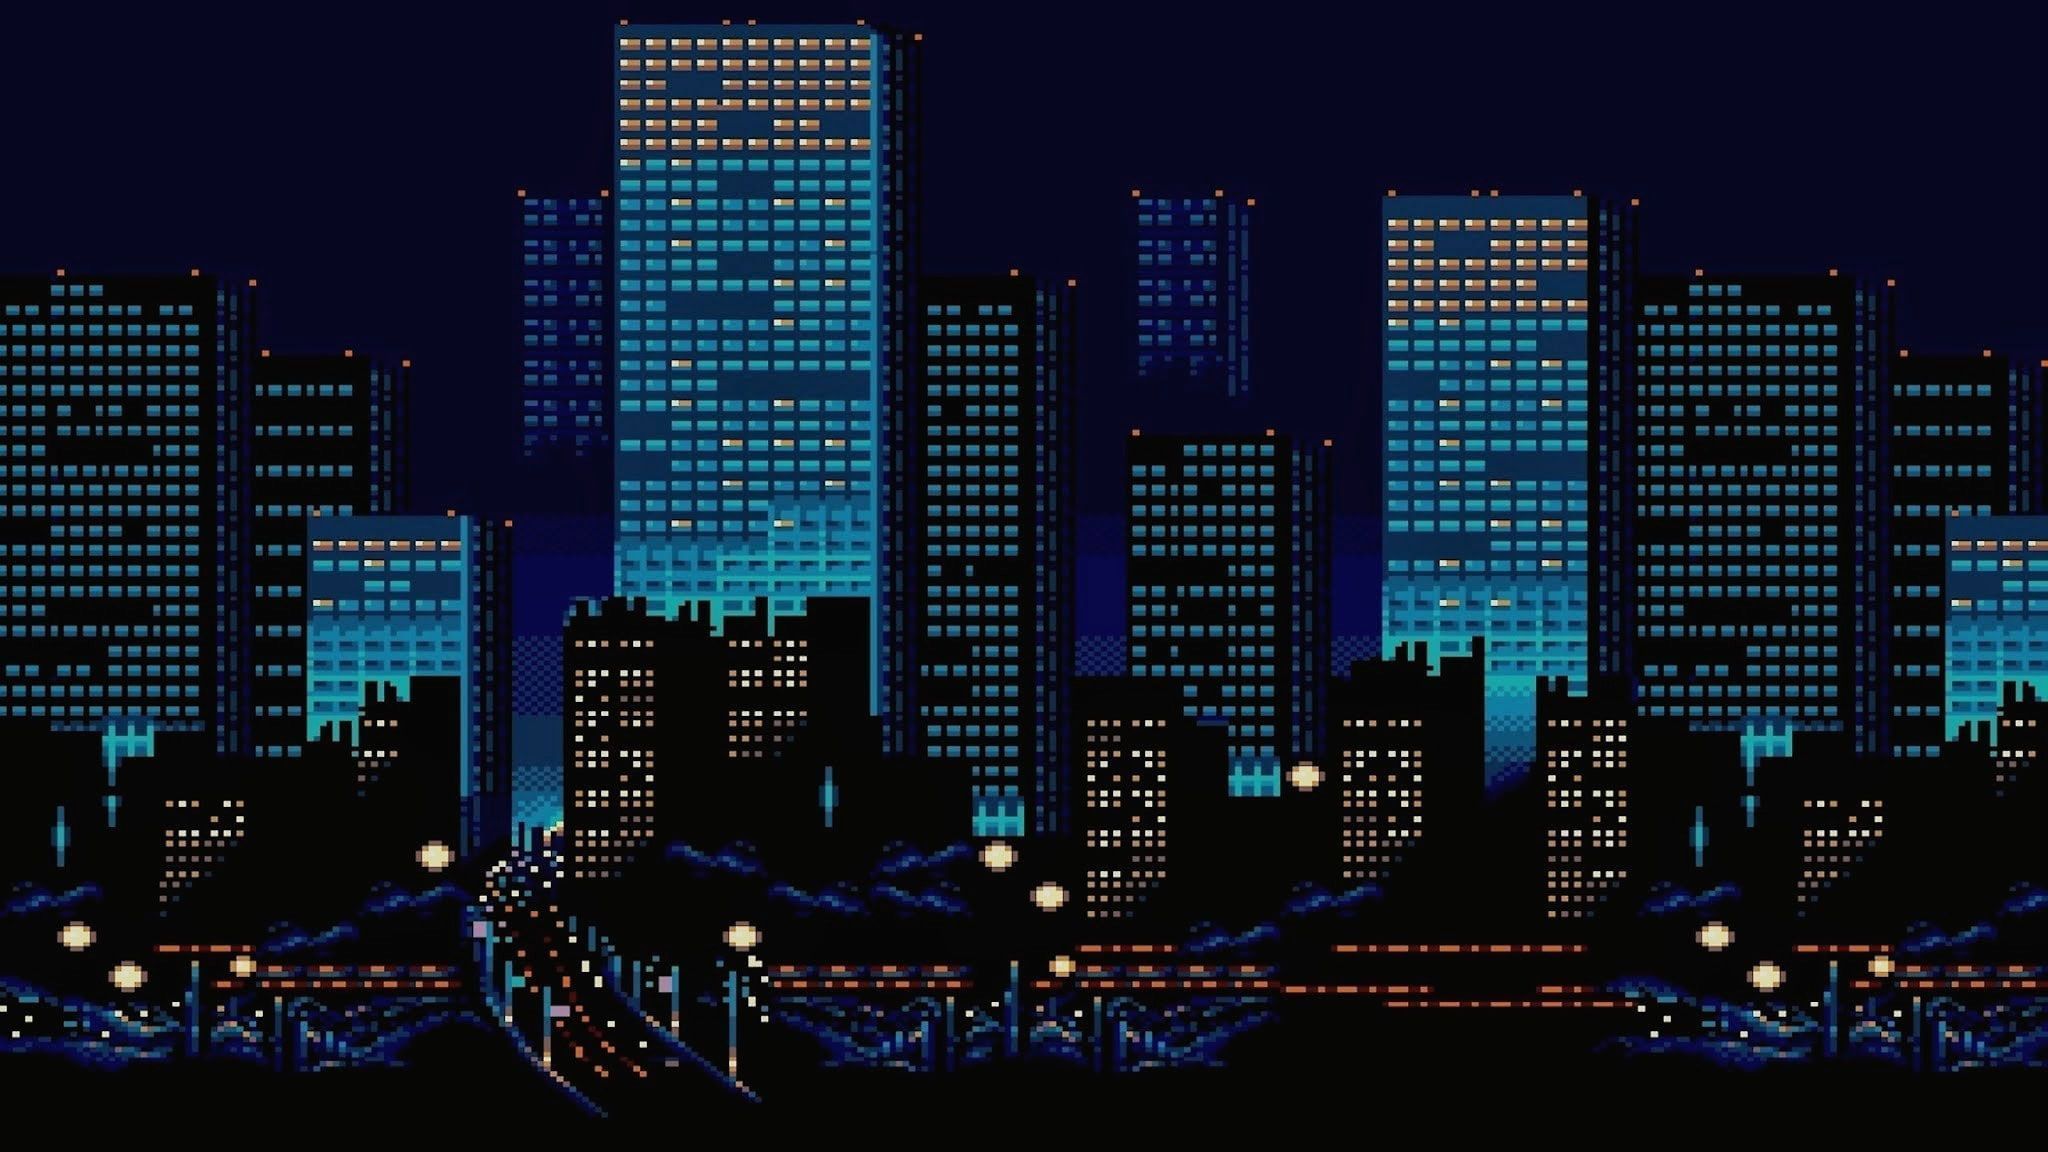 A pixel art image of a city at night with skyscrapers and a river - 2048x1152